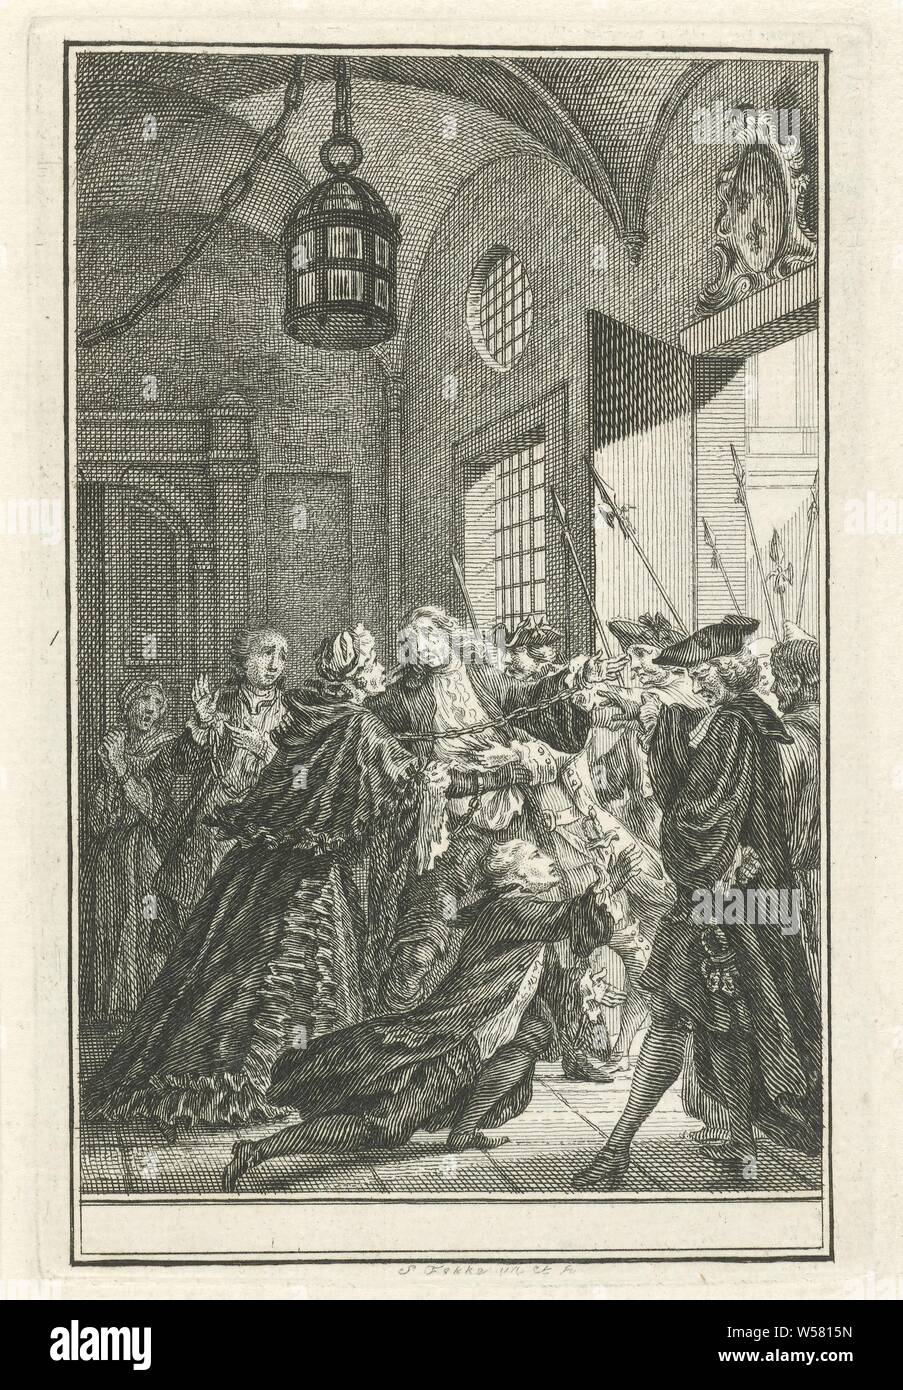 Four prisoners under the supervision of shooters, Four handcuffed prisoners are under supervision of guards in a hall. A male prisoner is stopped by a guard when he wants to embrace a woman who is also handcuffed. In the foreground a prisoner kneels before the overseer., Prisoner with hands bound, Simon Fokke (mentioned on object), Amsterdam, 1722 - 1784, paper, etching, h 128 mm × w 86 mm Stock Photo